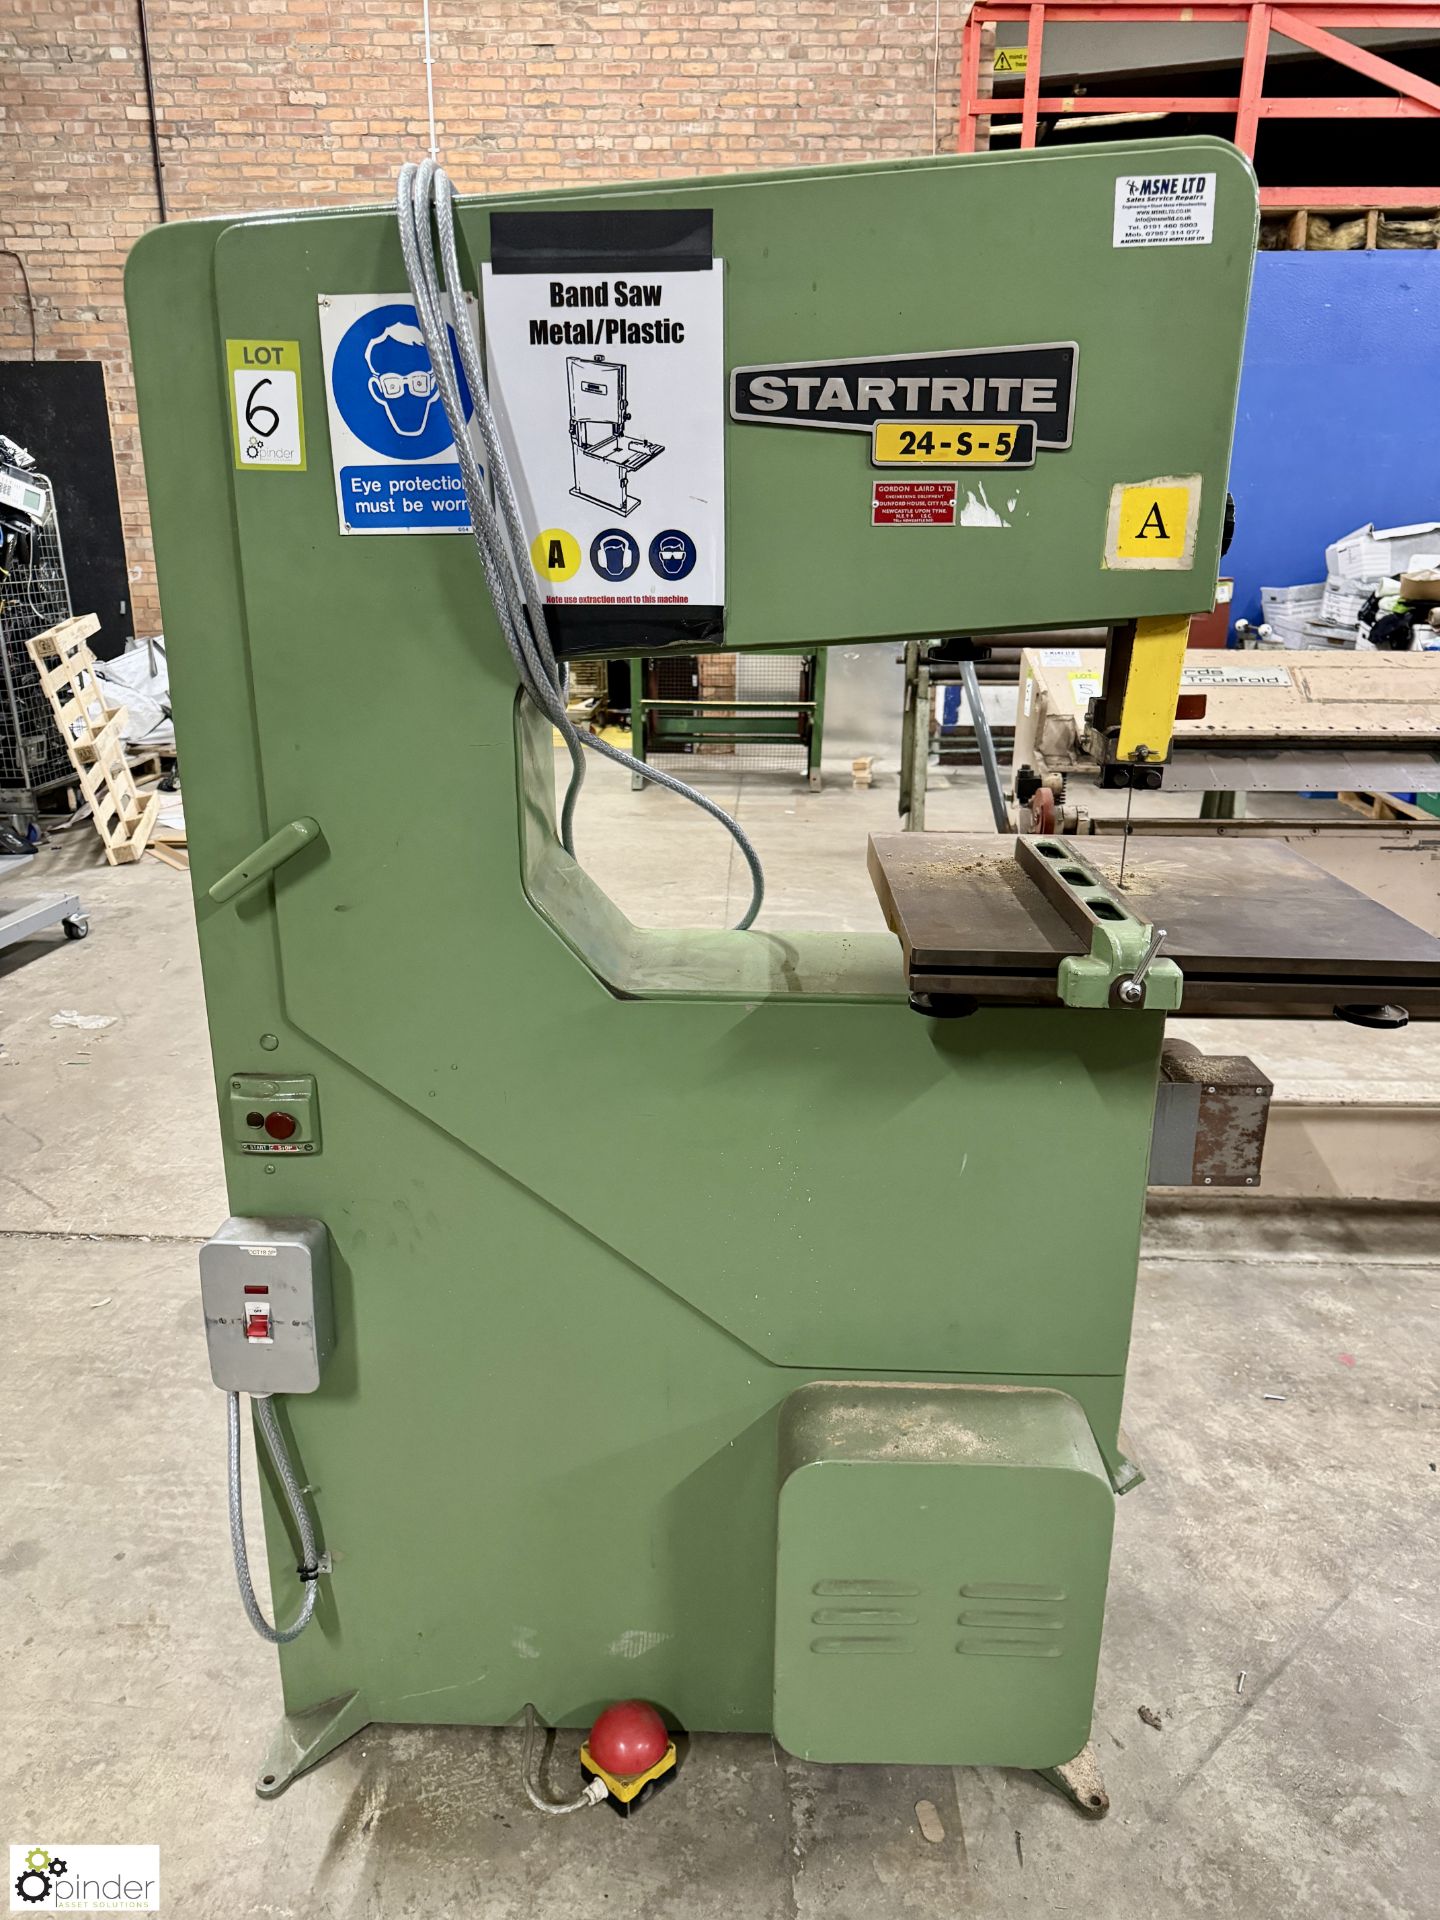 Startrite 24-S-5 vertical Bandsaw, 415volts, 600mm throat, serial number 27011, with MTE power - Image 2 of 8